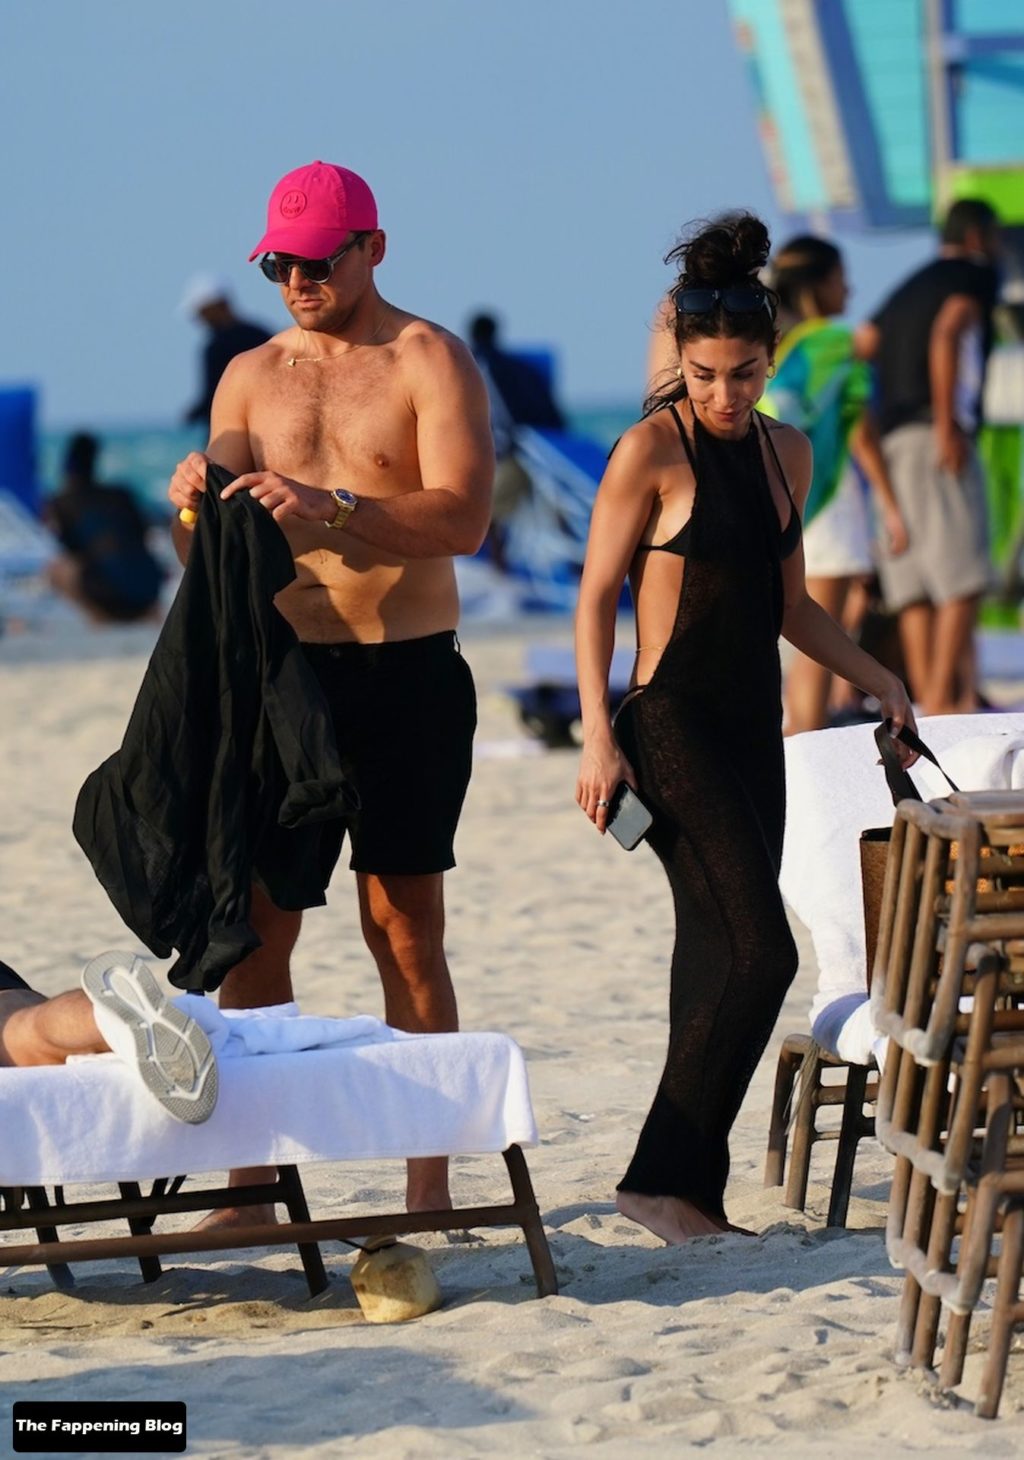 Chantel Jeffries Sexy The Fappening Blog 17 1024x1460 - Chantel Jeffries Enjoys a Day on the Beach in Miami (24 Photos)